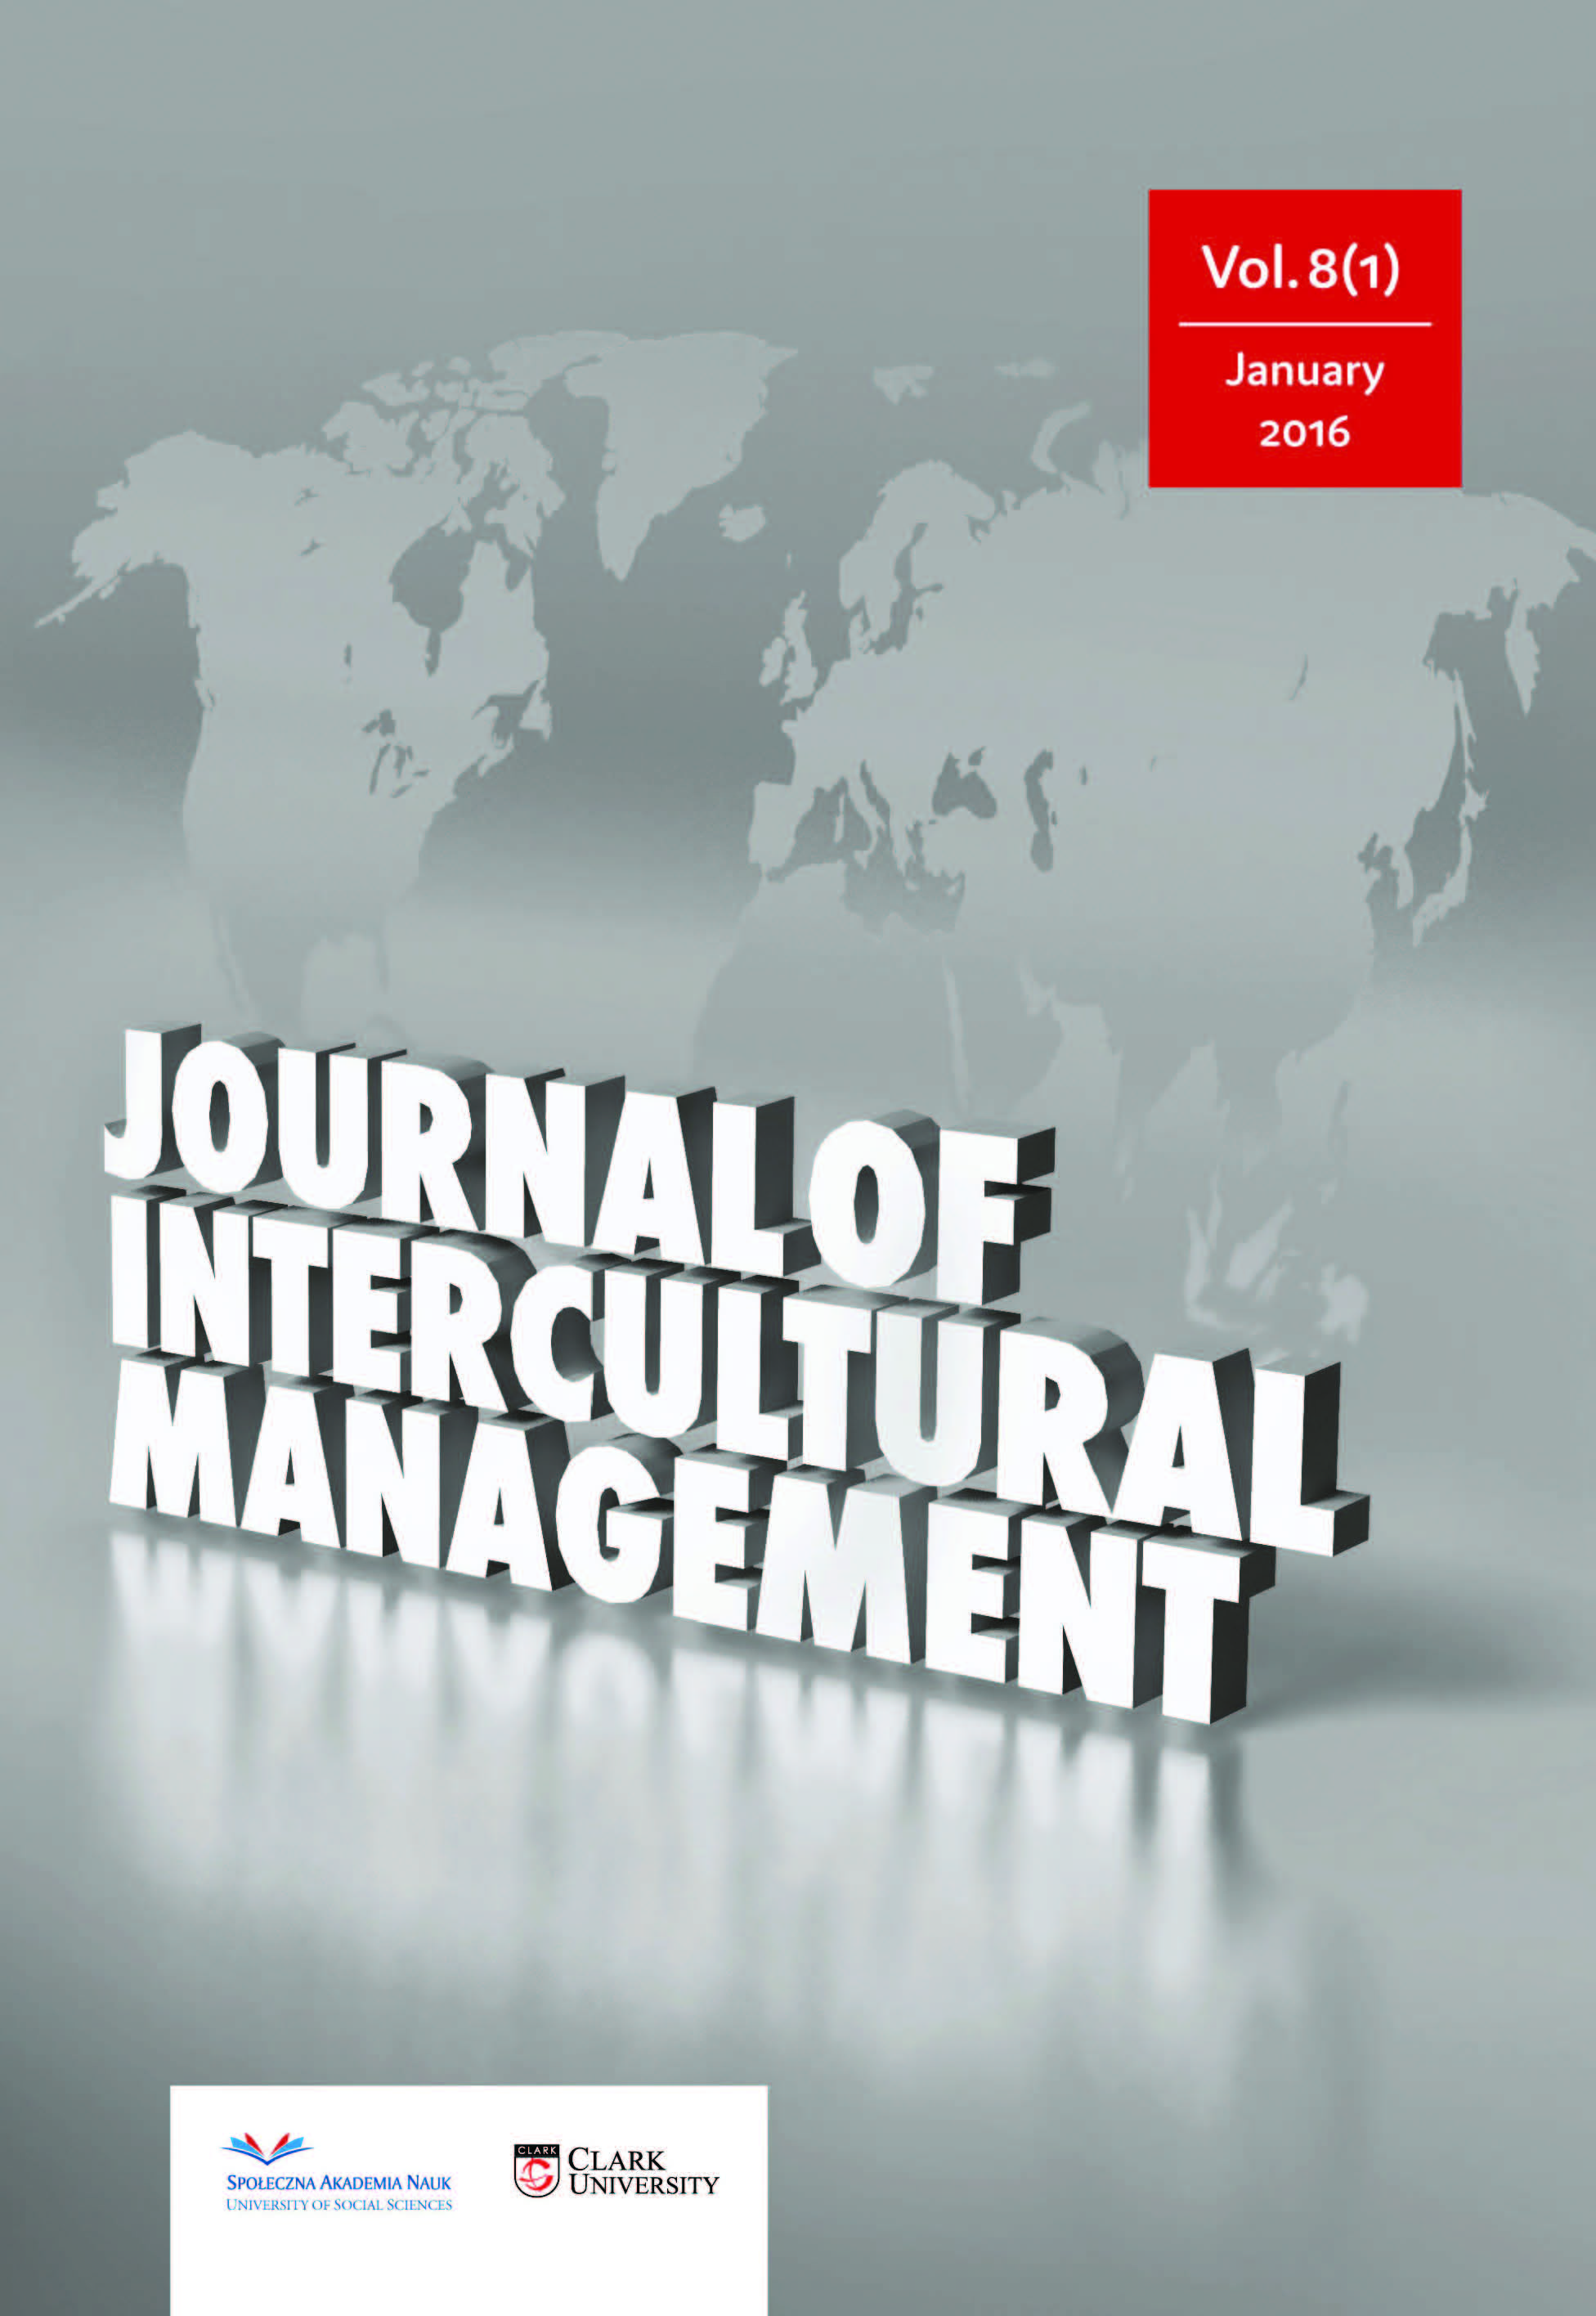 The Cultural Inheritance of Abilities and Skills in Entrepreneurship Domain as a Determinant of Organizational Leadership Cover Image